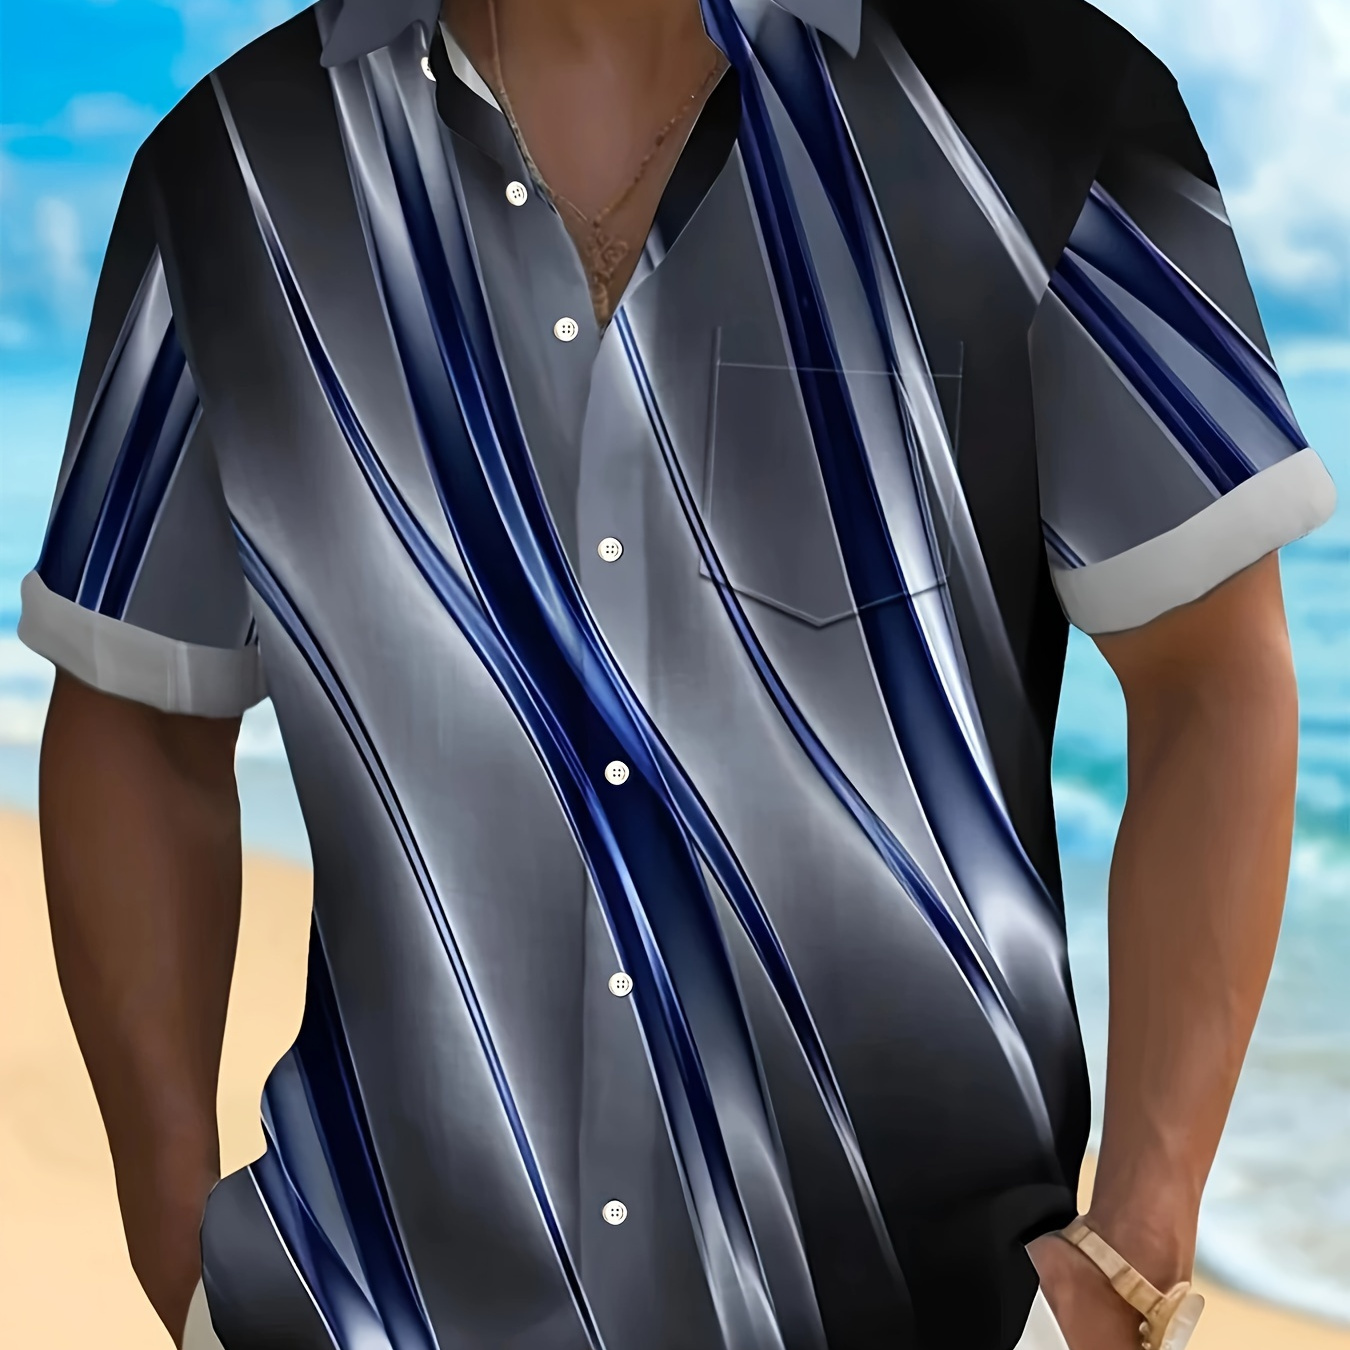 

Plus Size Men's Stripes Graphic Print Shirt For Summer, Fashion Casual Short Sleeve Shirt For Beach Vacation